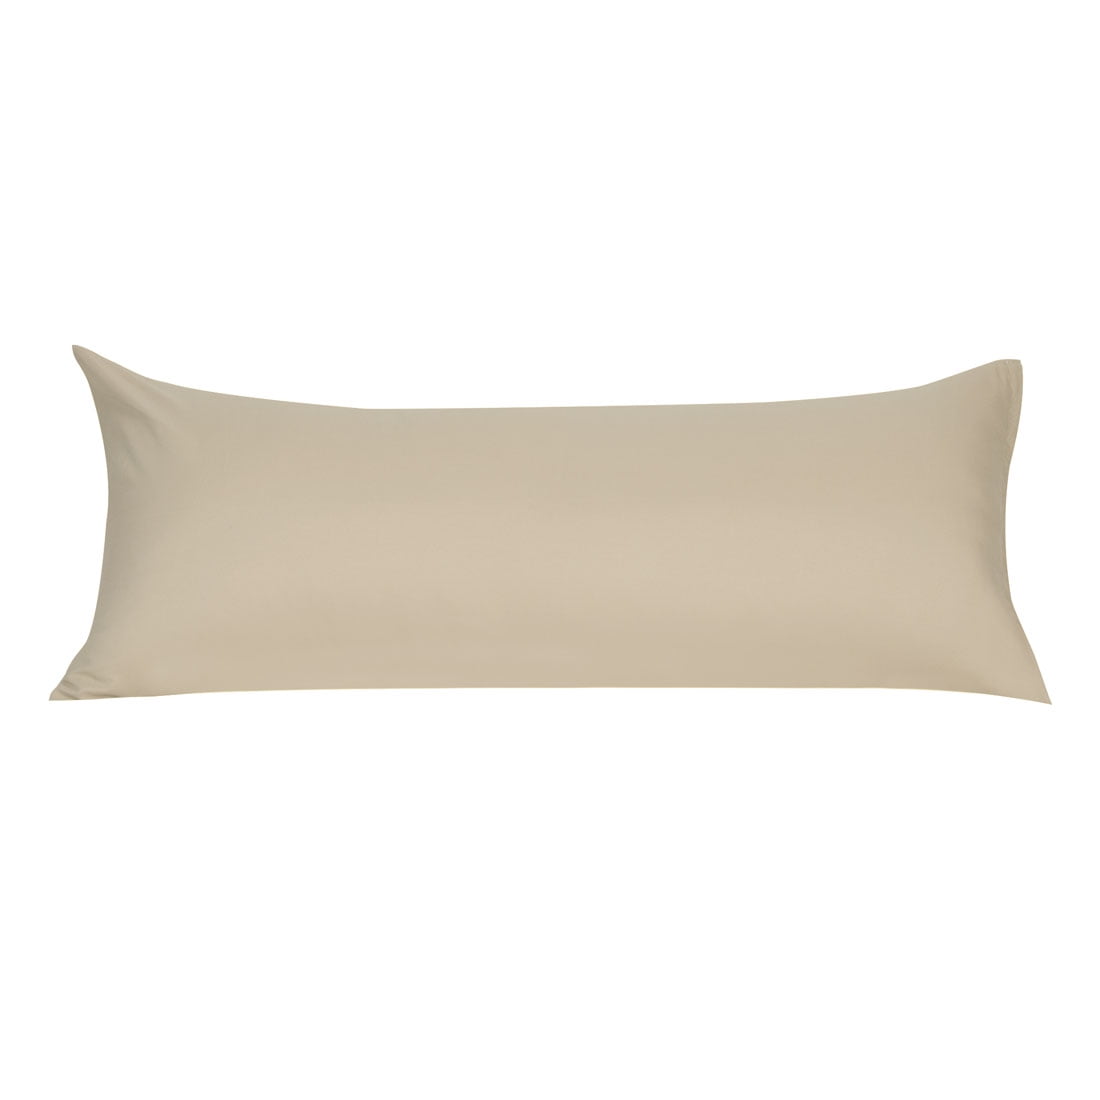 Pillowcases 2 Details about   Made by Design Easy Care Standard Size Beige Linen Brown NEW 